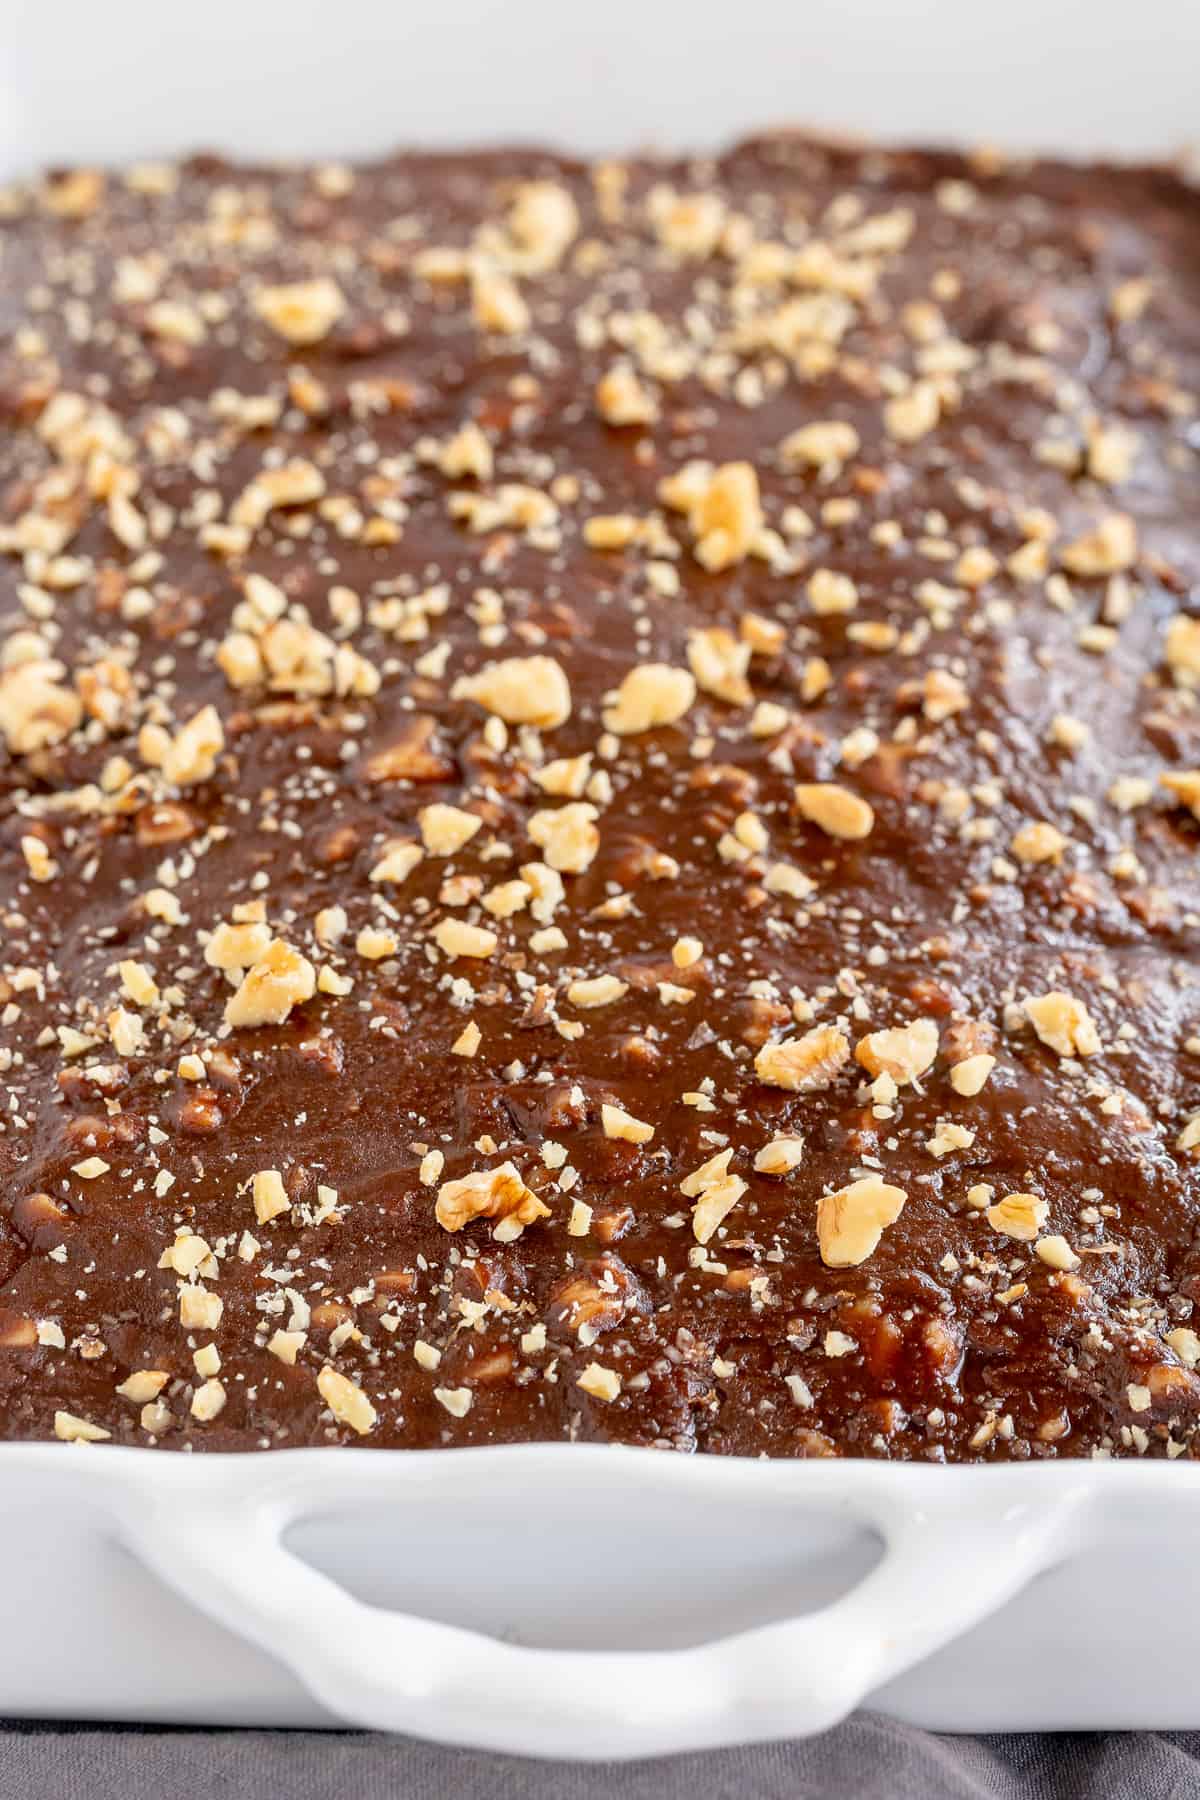 A close up of a cake with chocolate frosting and walnuts.